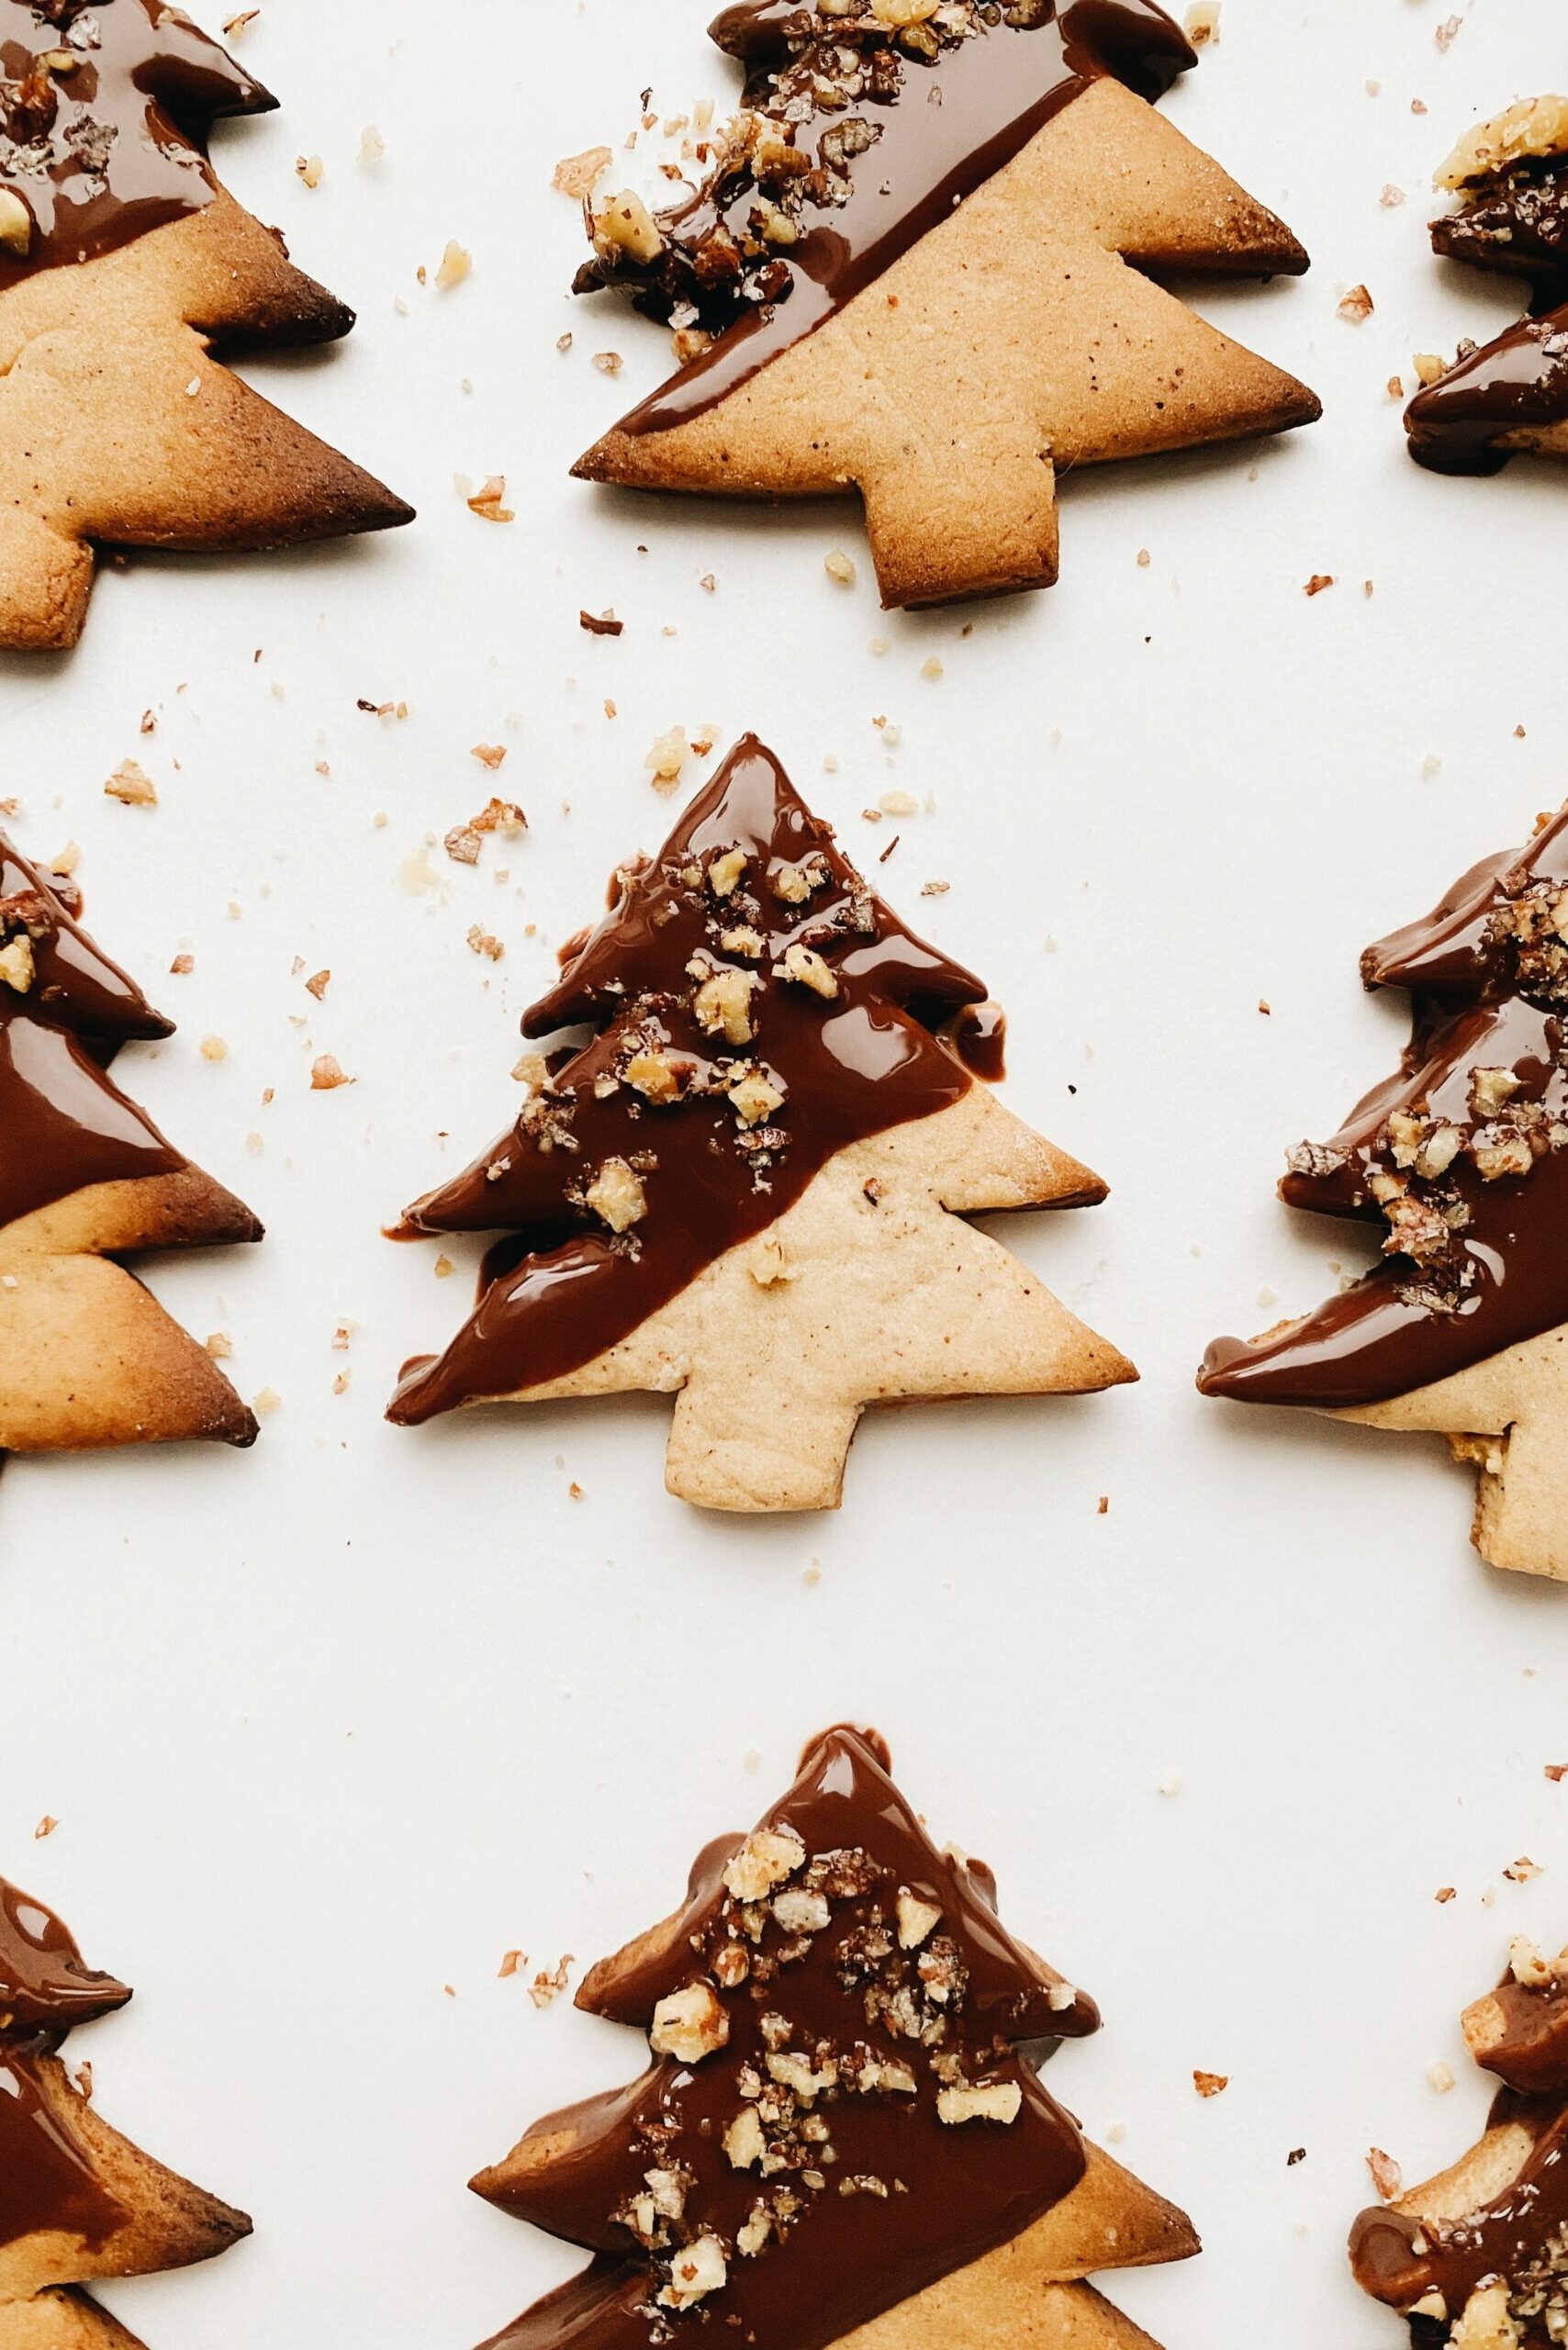 Rows of fir tree cookies lay on a white surface. They are partially covered in chocolate on the diagonal on the top left and sprinkled with small pieces of nuts.